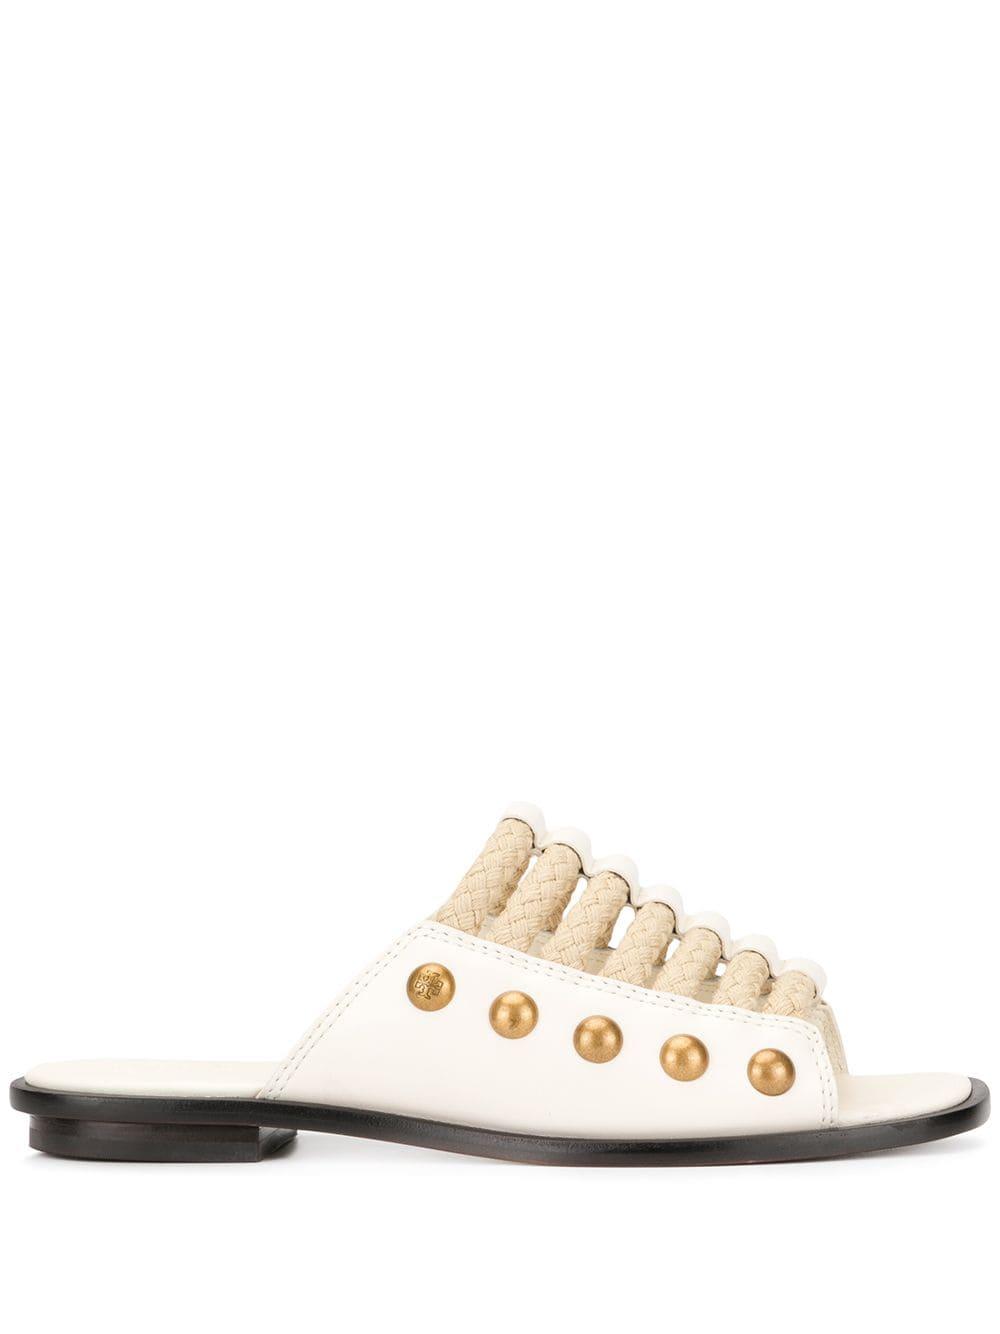 Tory Burch Blythe Rope Sliders in White | Lyst Canada